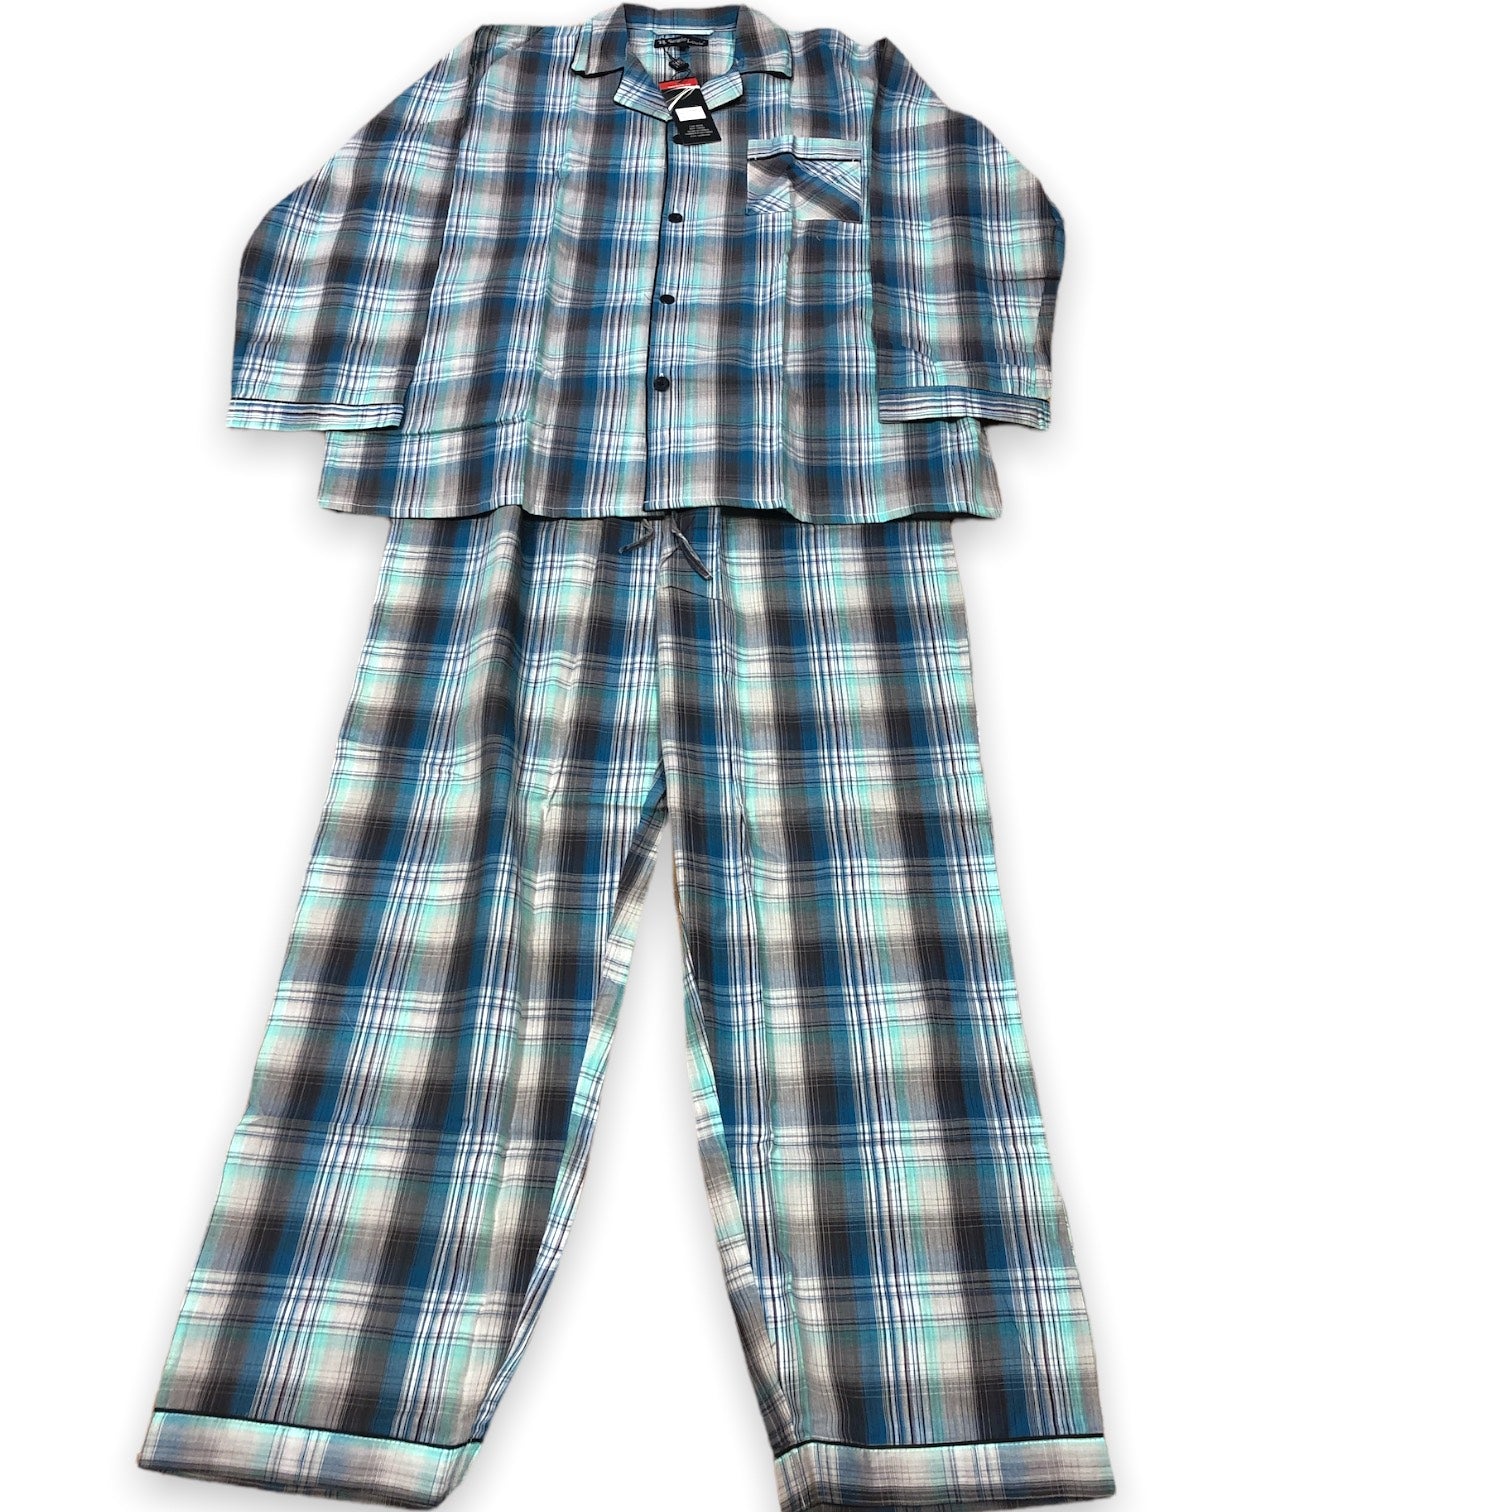 Men's Two Piece Poly Cotton Pajama Set with Matching Pants